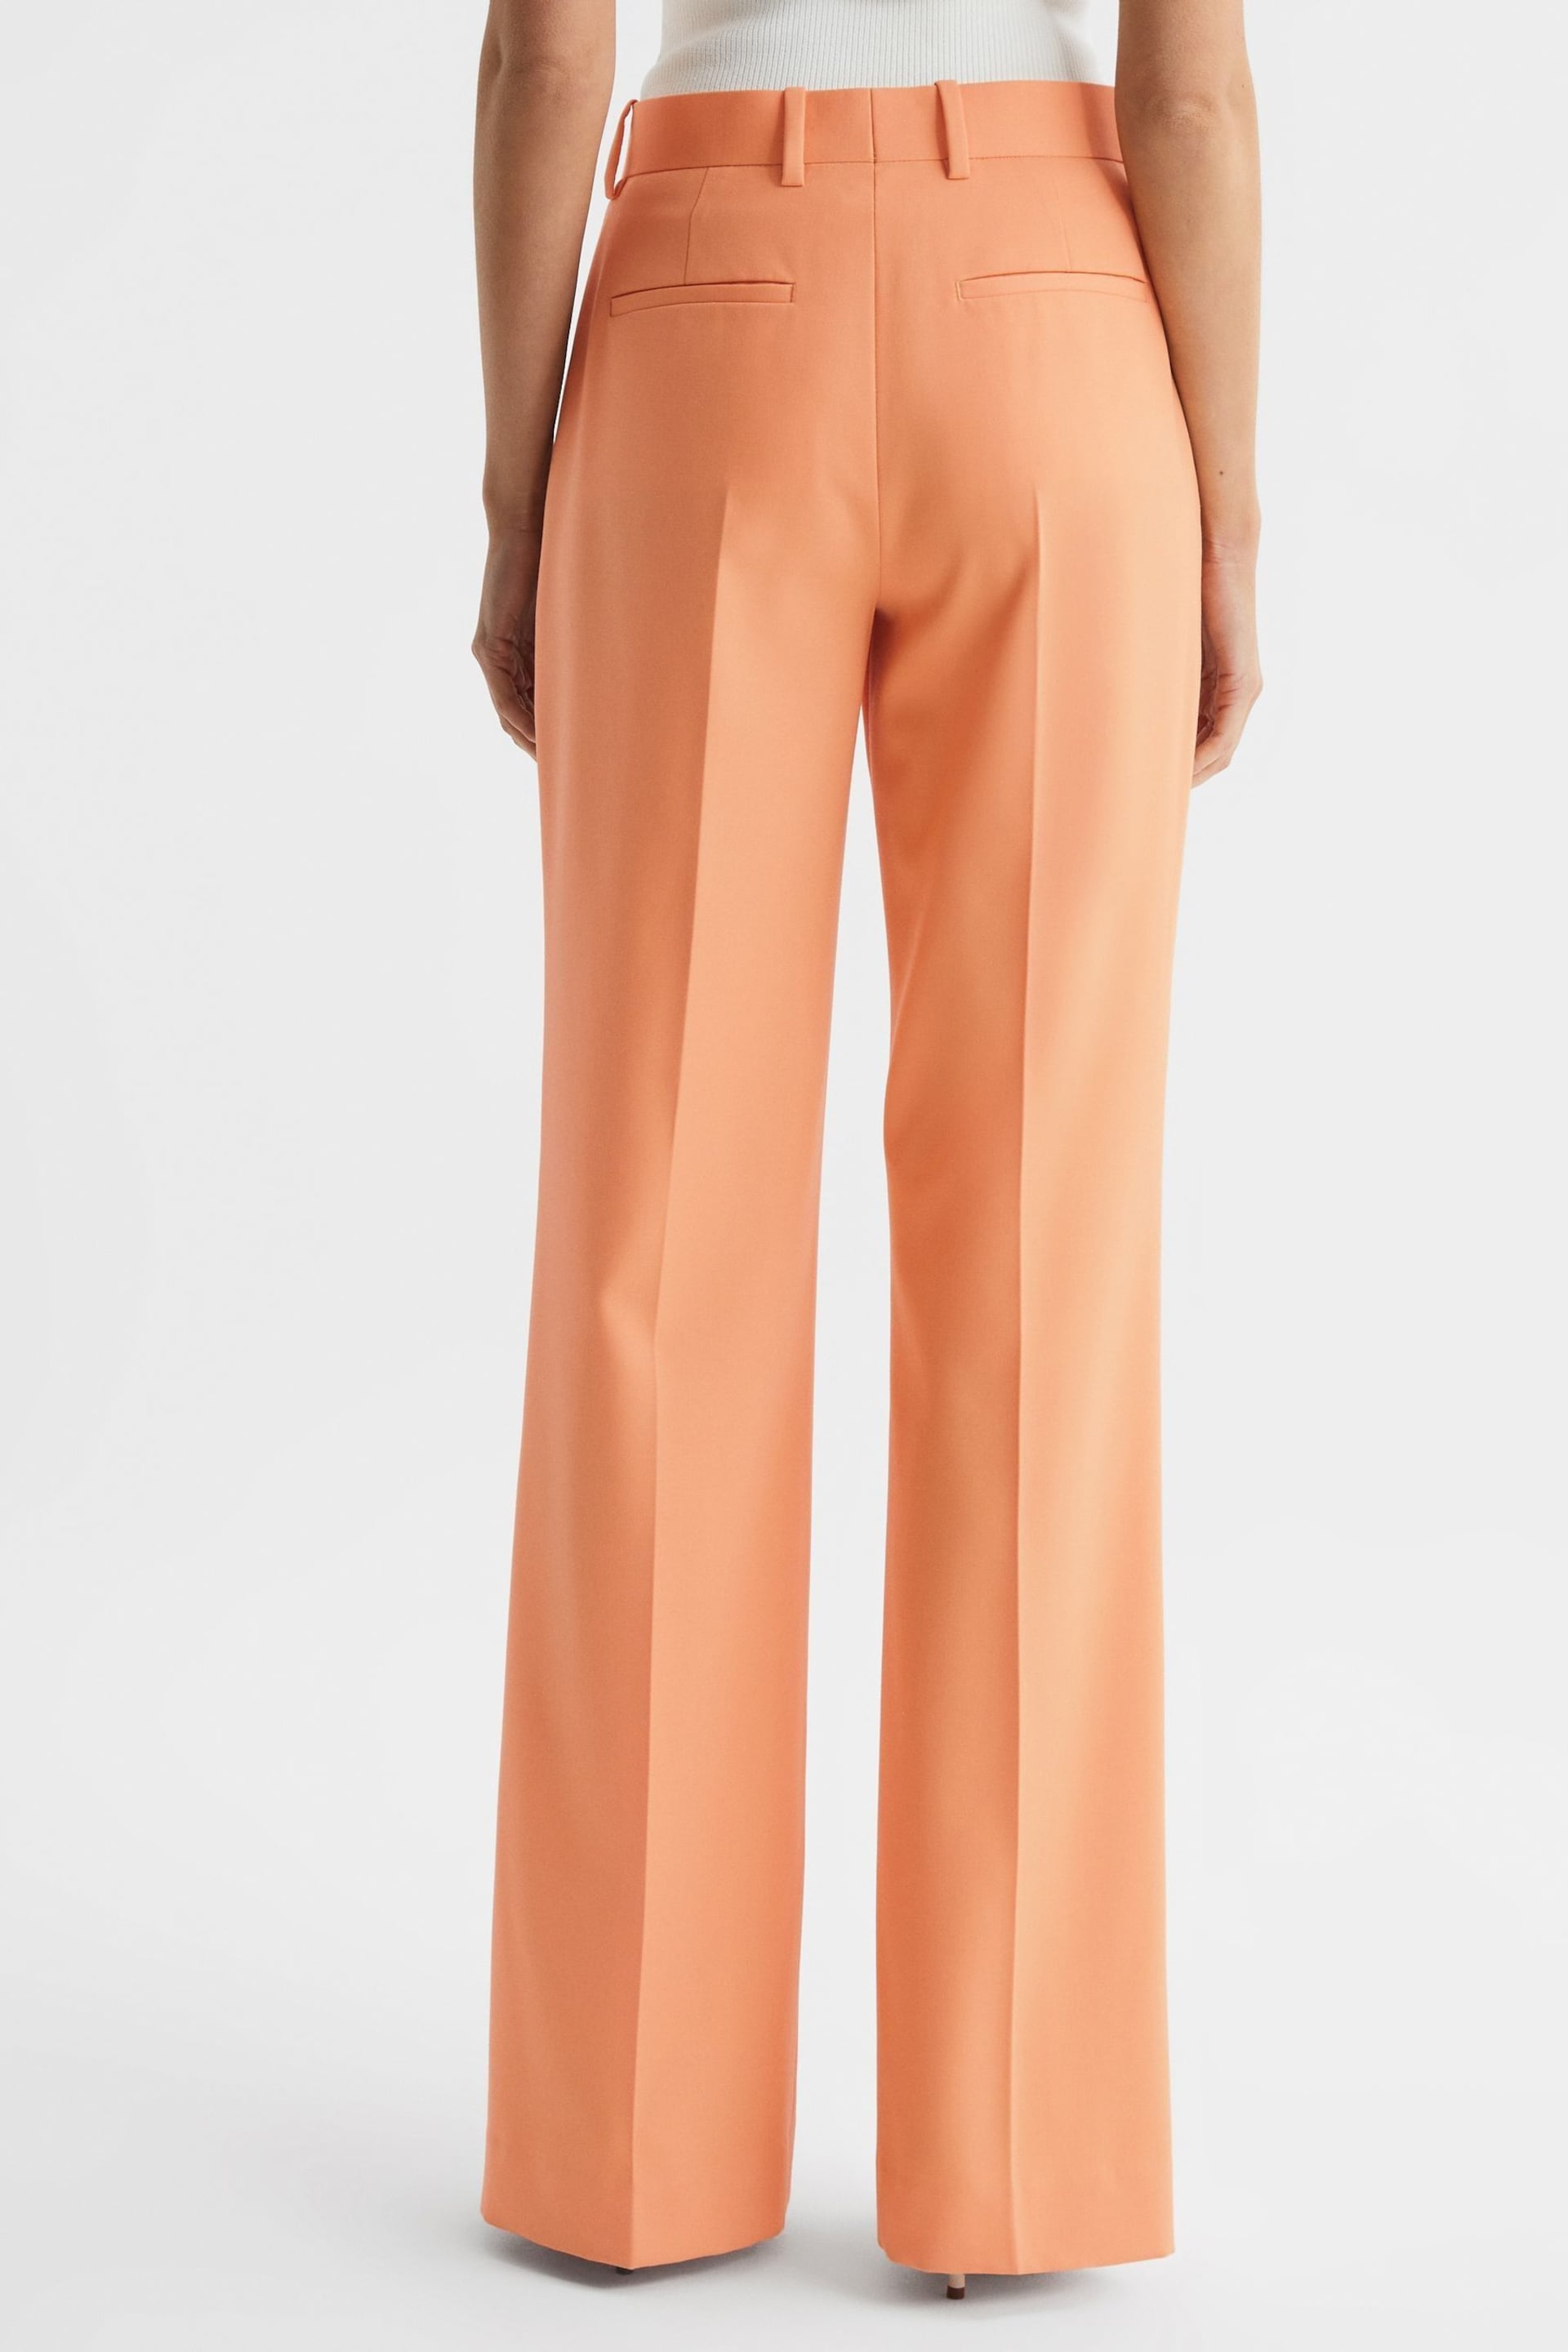 Reiss Orange Emmy Wide Leg Tailored Trousers - Image 5 of 7